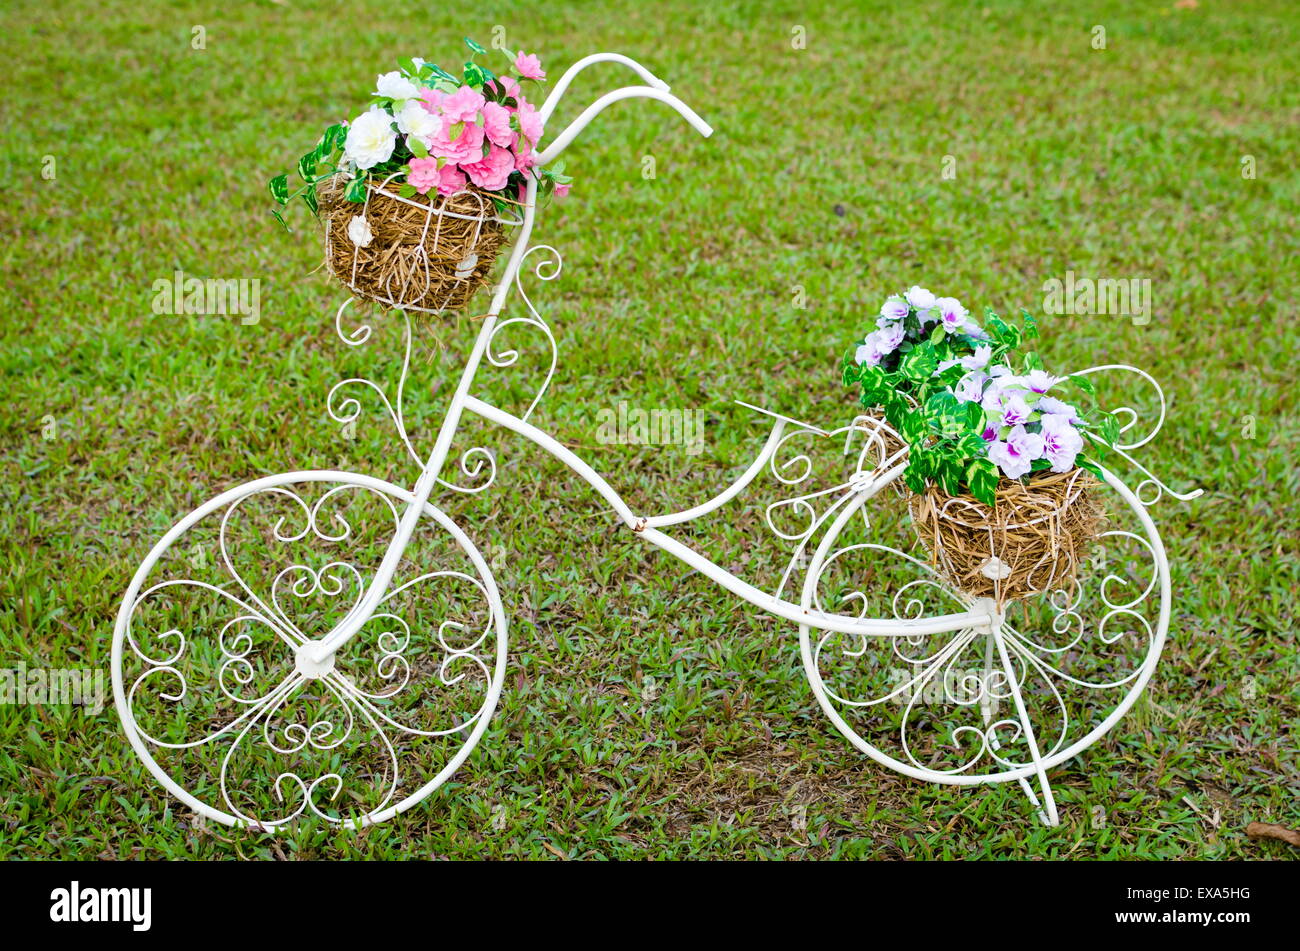 White steel bike and flower pots on the grass Stock Photo